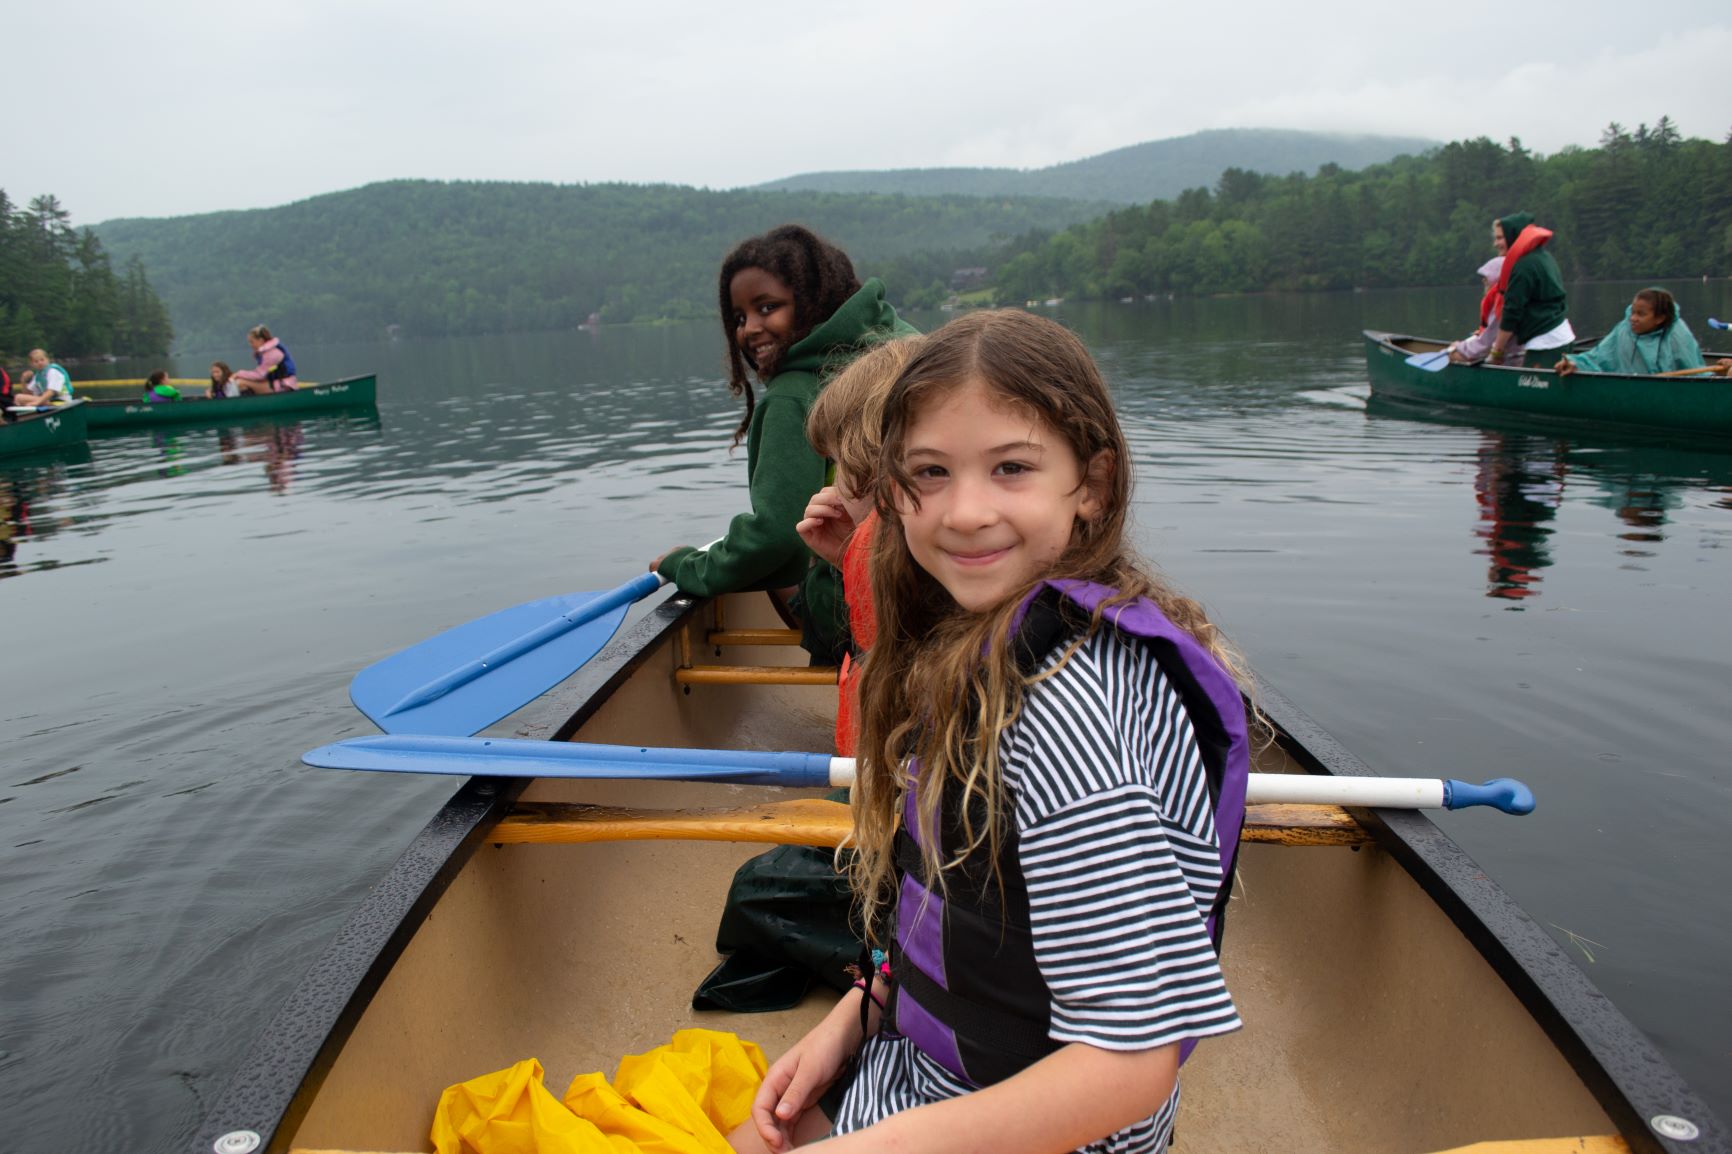 Three campers in a canoe smiling on the lake.